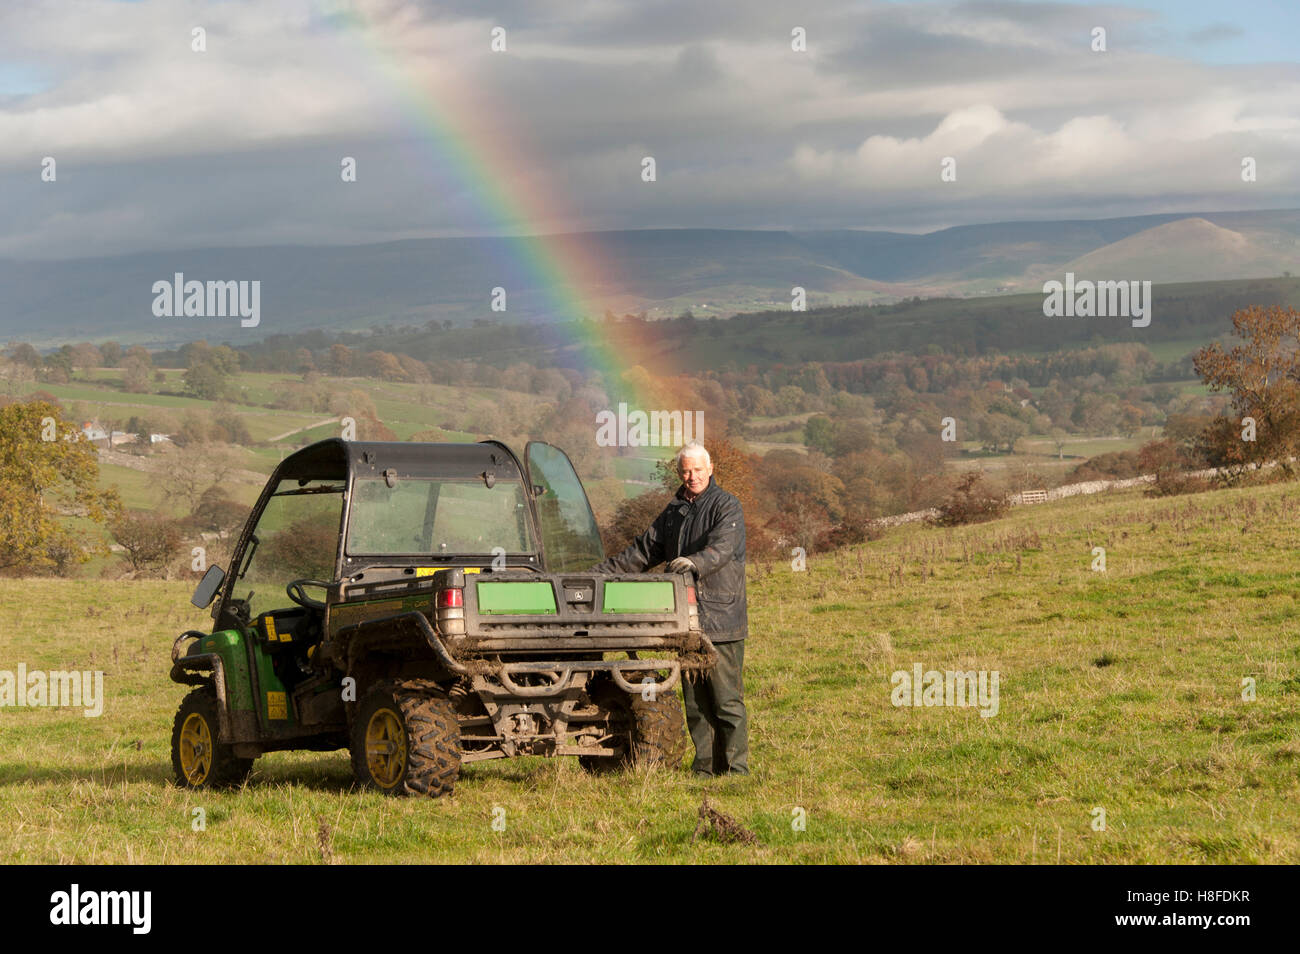 Farmer in upland pasture, leaning on a 4x4 farm vehicle, with a rainbow behind him. Stock Photo